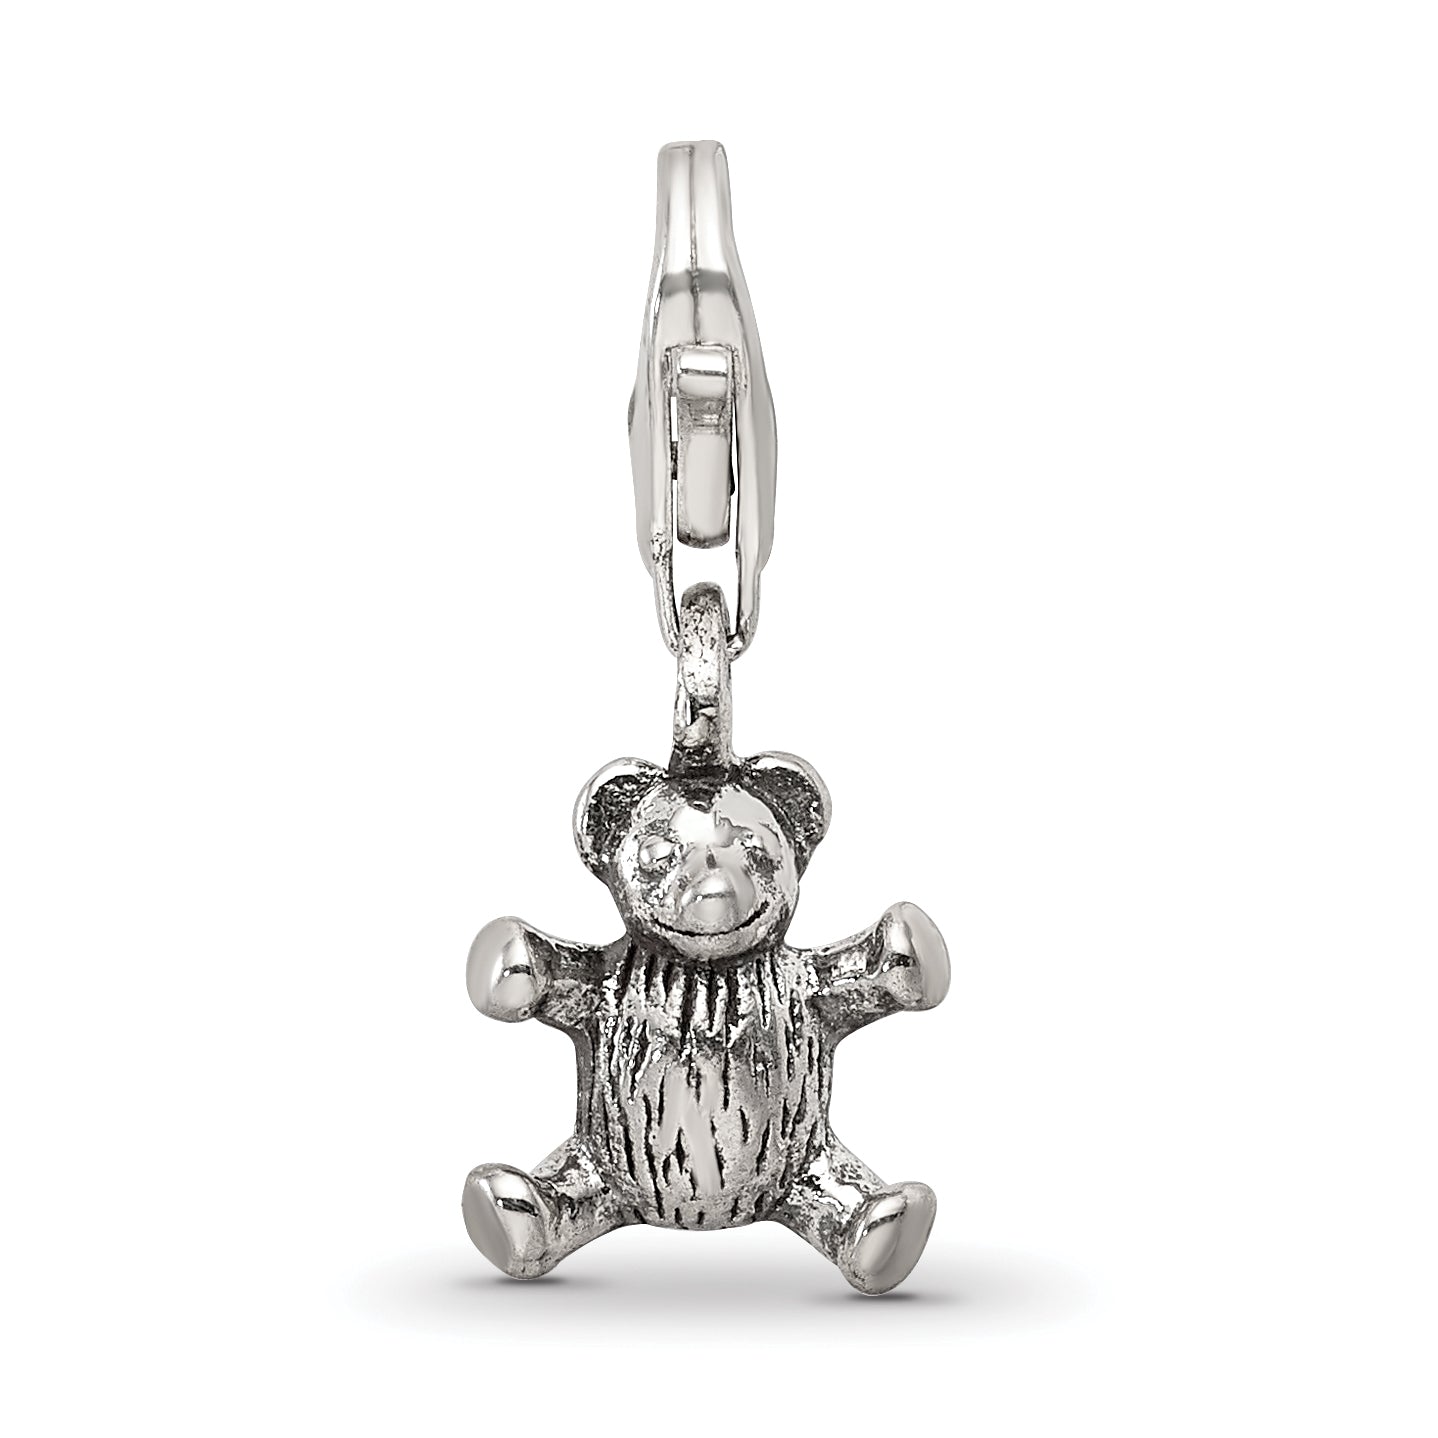 Sterling Silver Reflections Teddy Bear Click-on for Bead